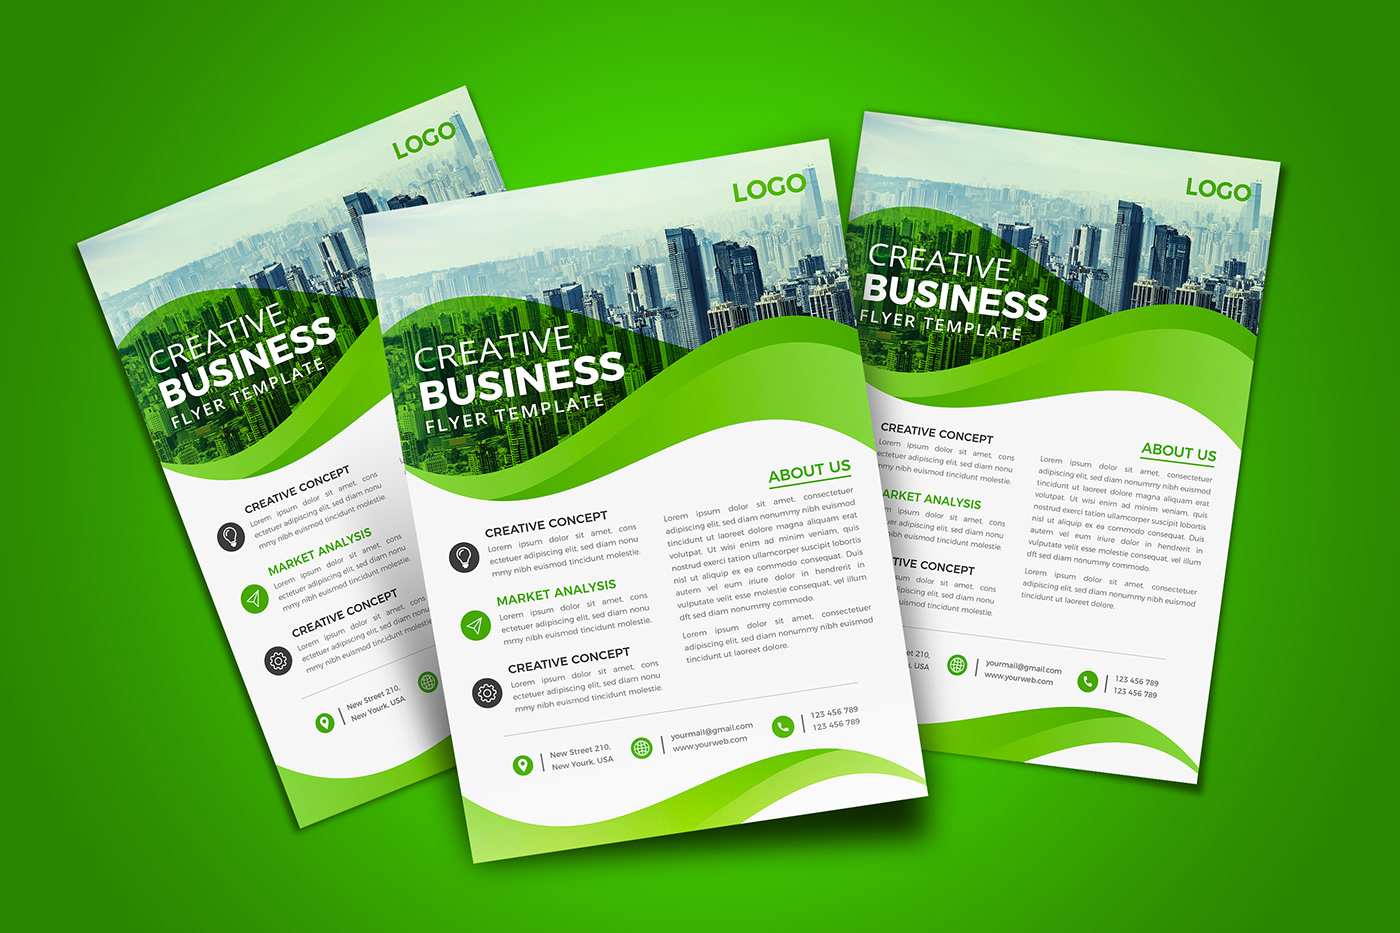 This is a Creative Business flyer template to announce special events and for direct marketing